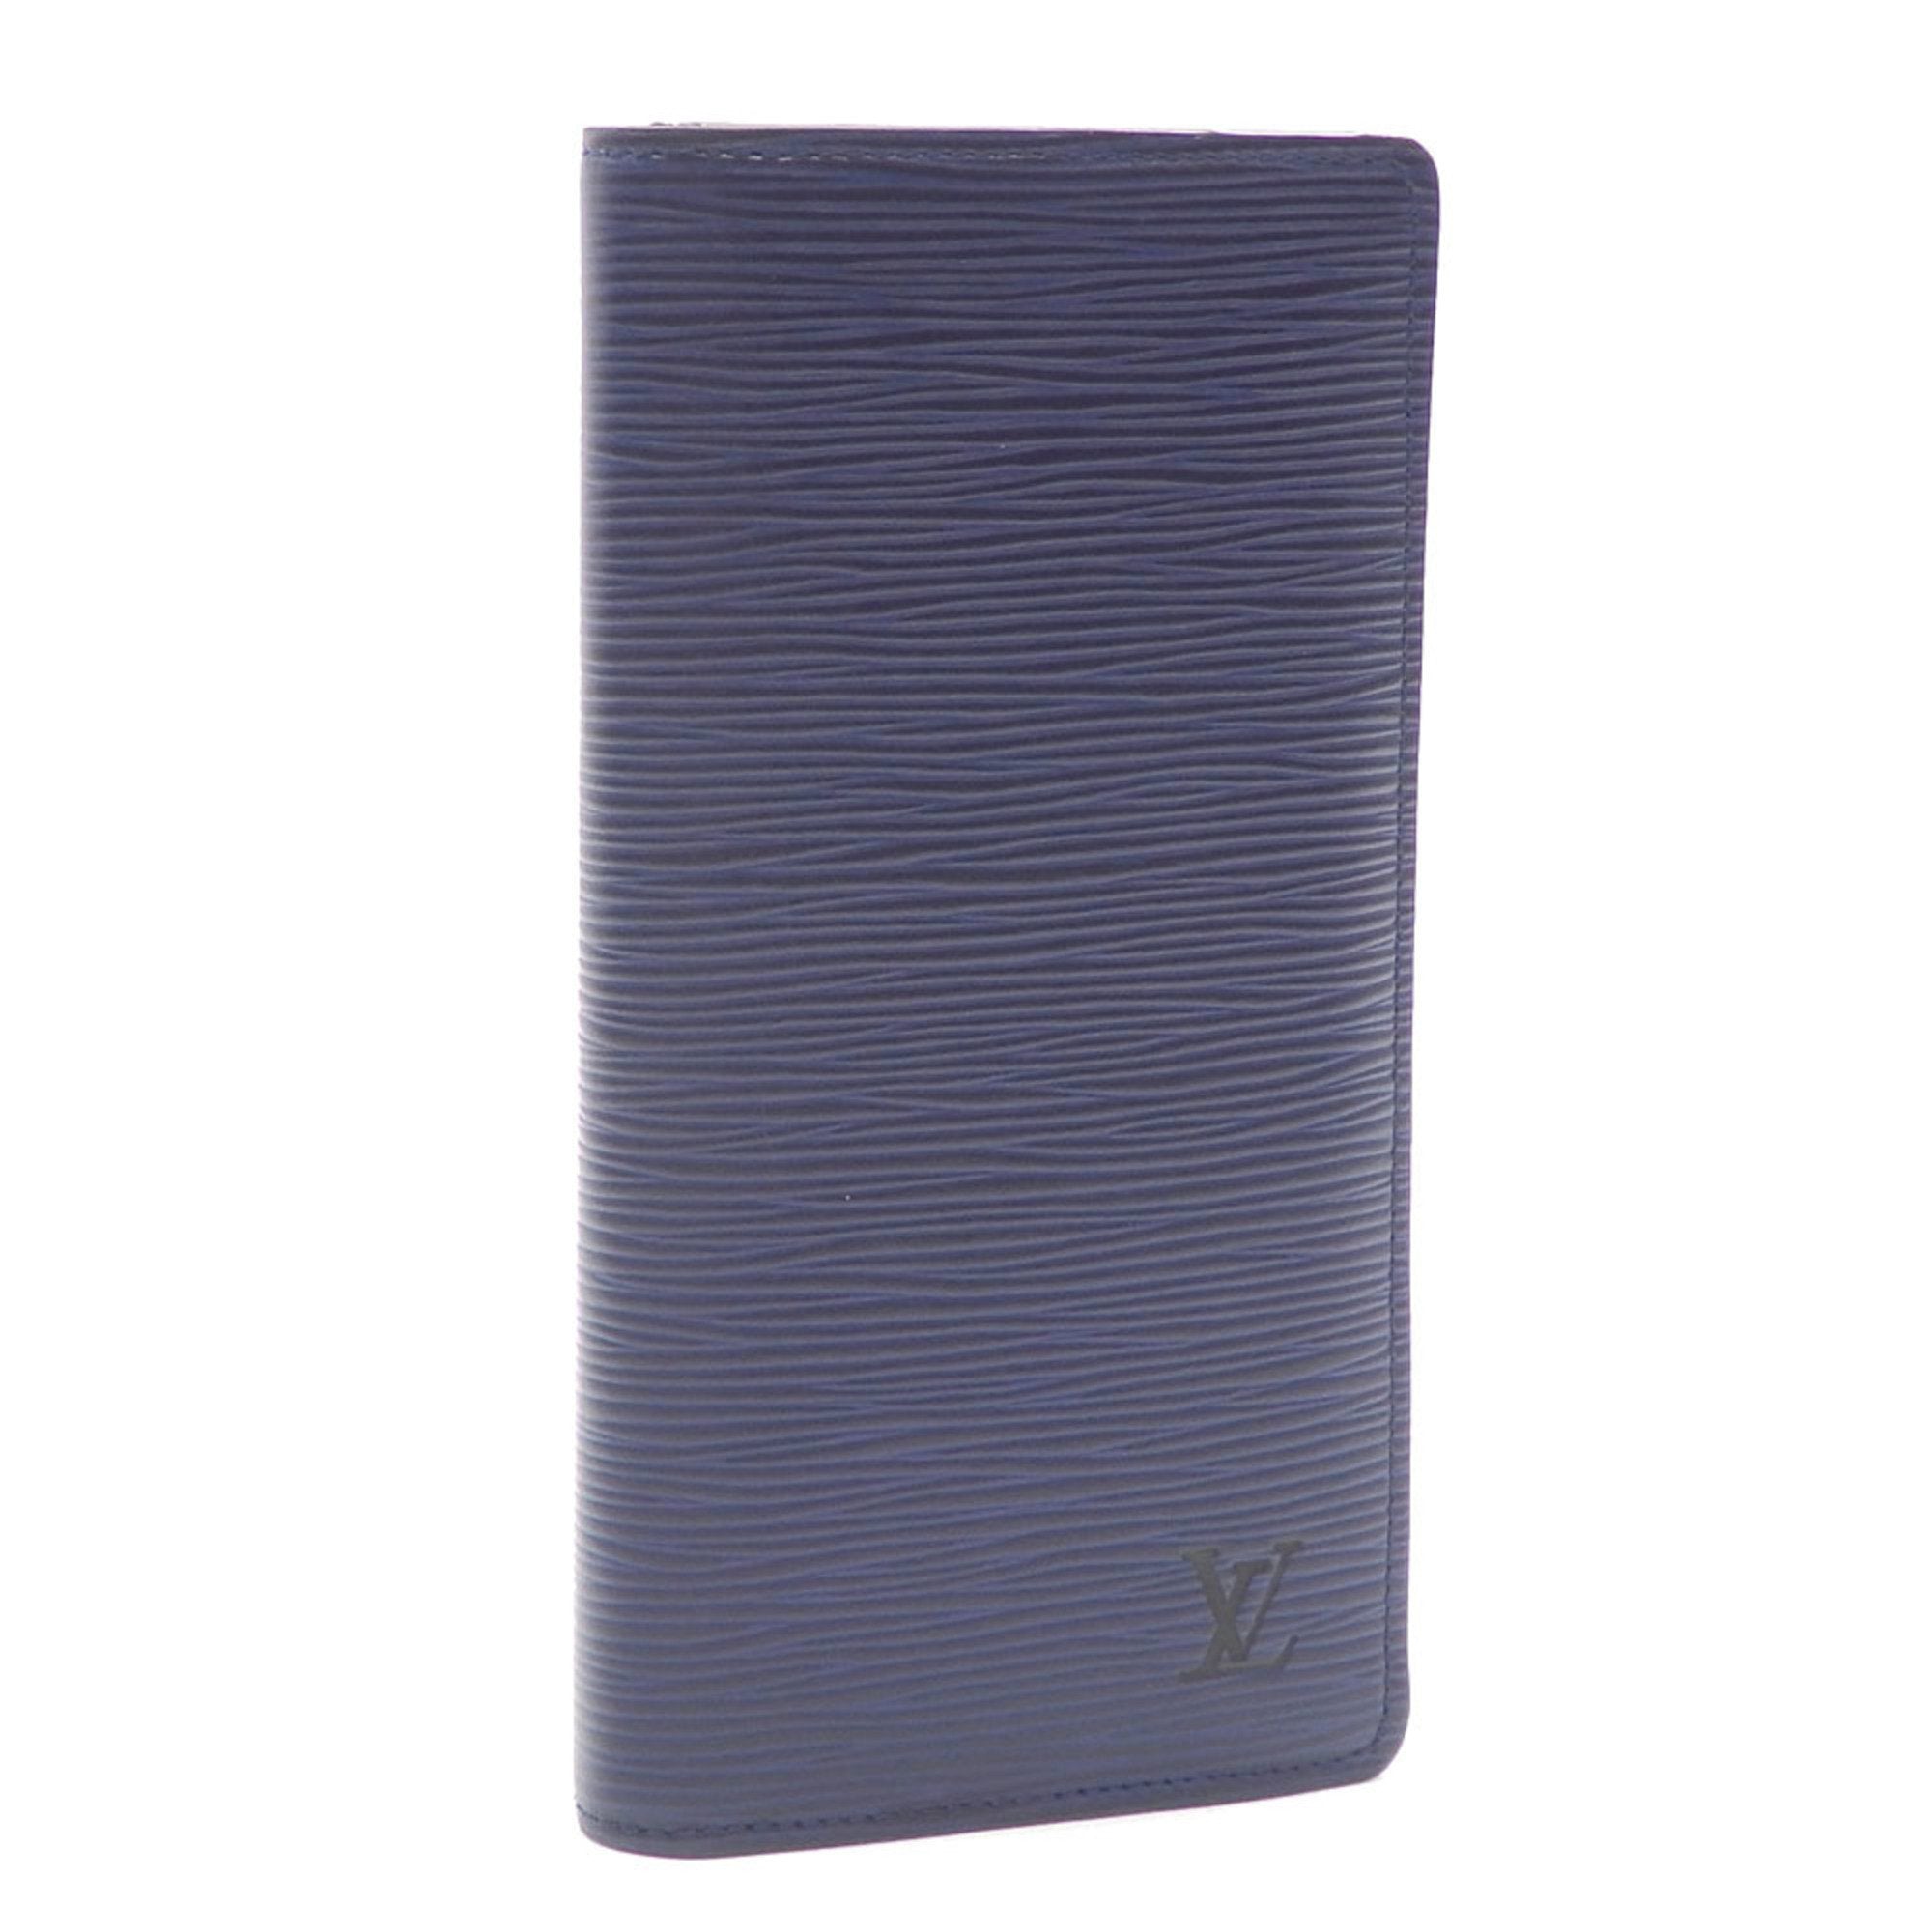 Louis Vuitton Portefeuille Brazza Navy Leather Wallet (Pre-Owned)